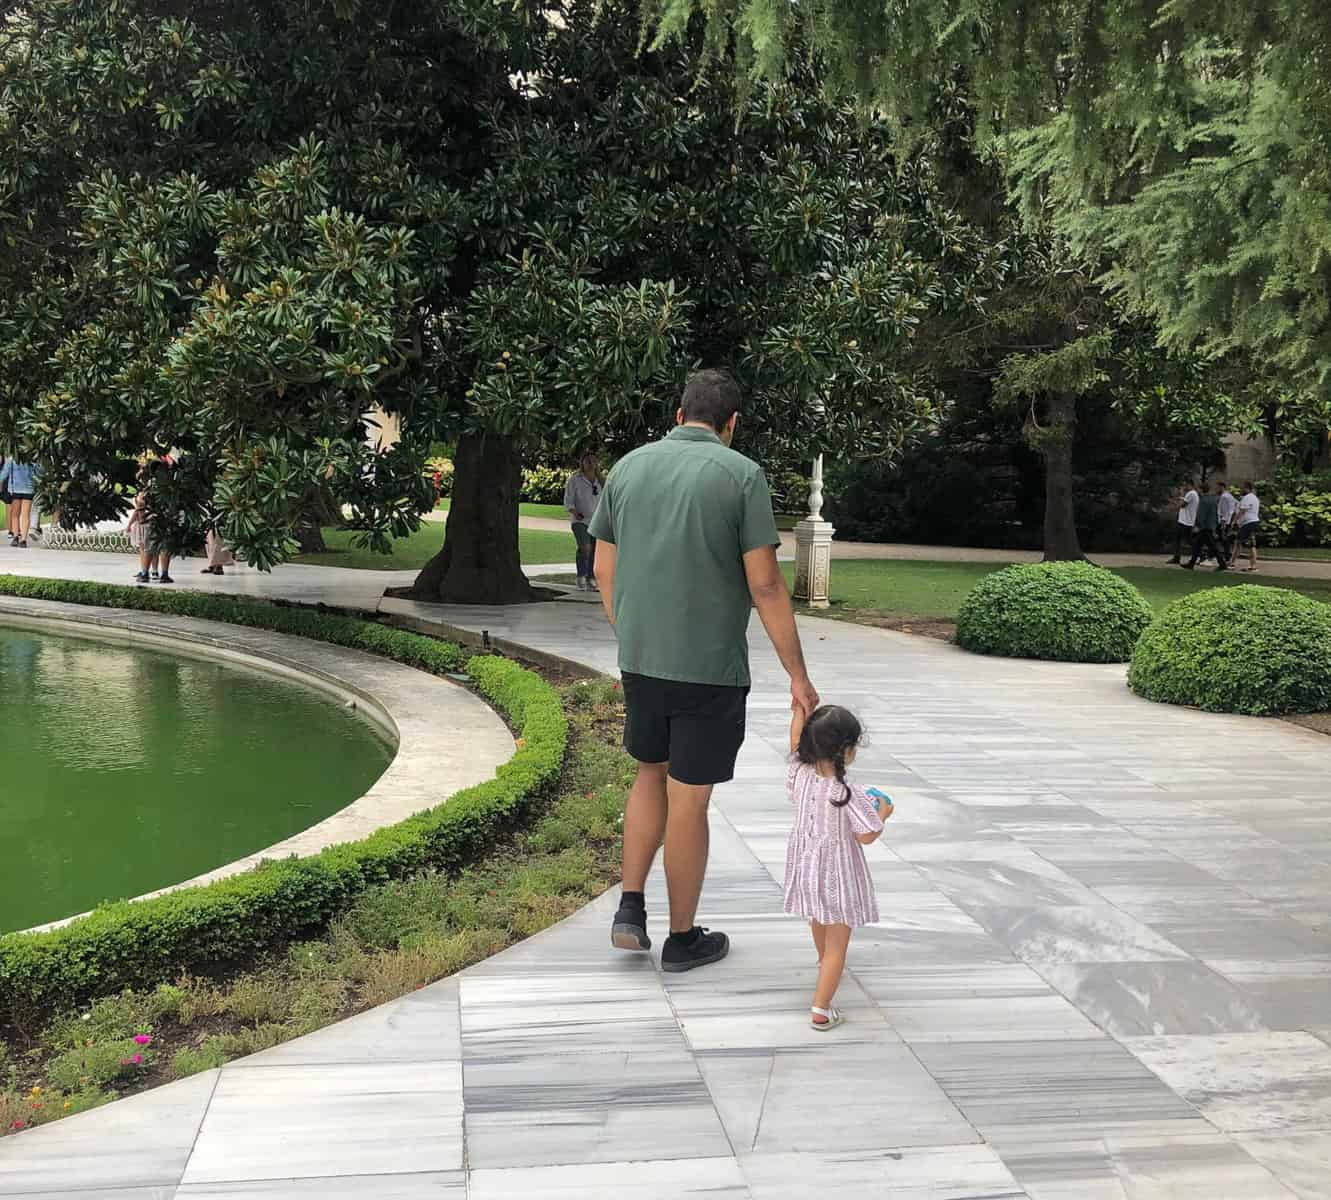 Is Istanbul stroller friendly? Definitely in the green spaces!